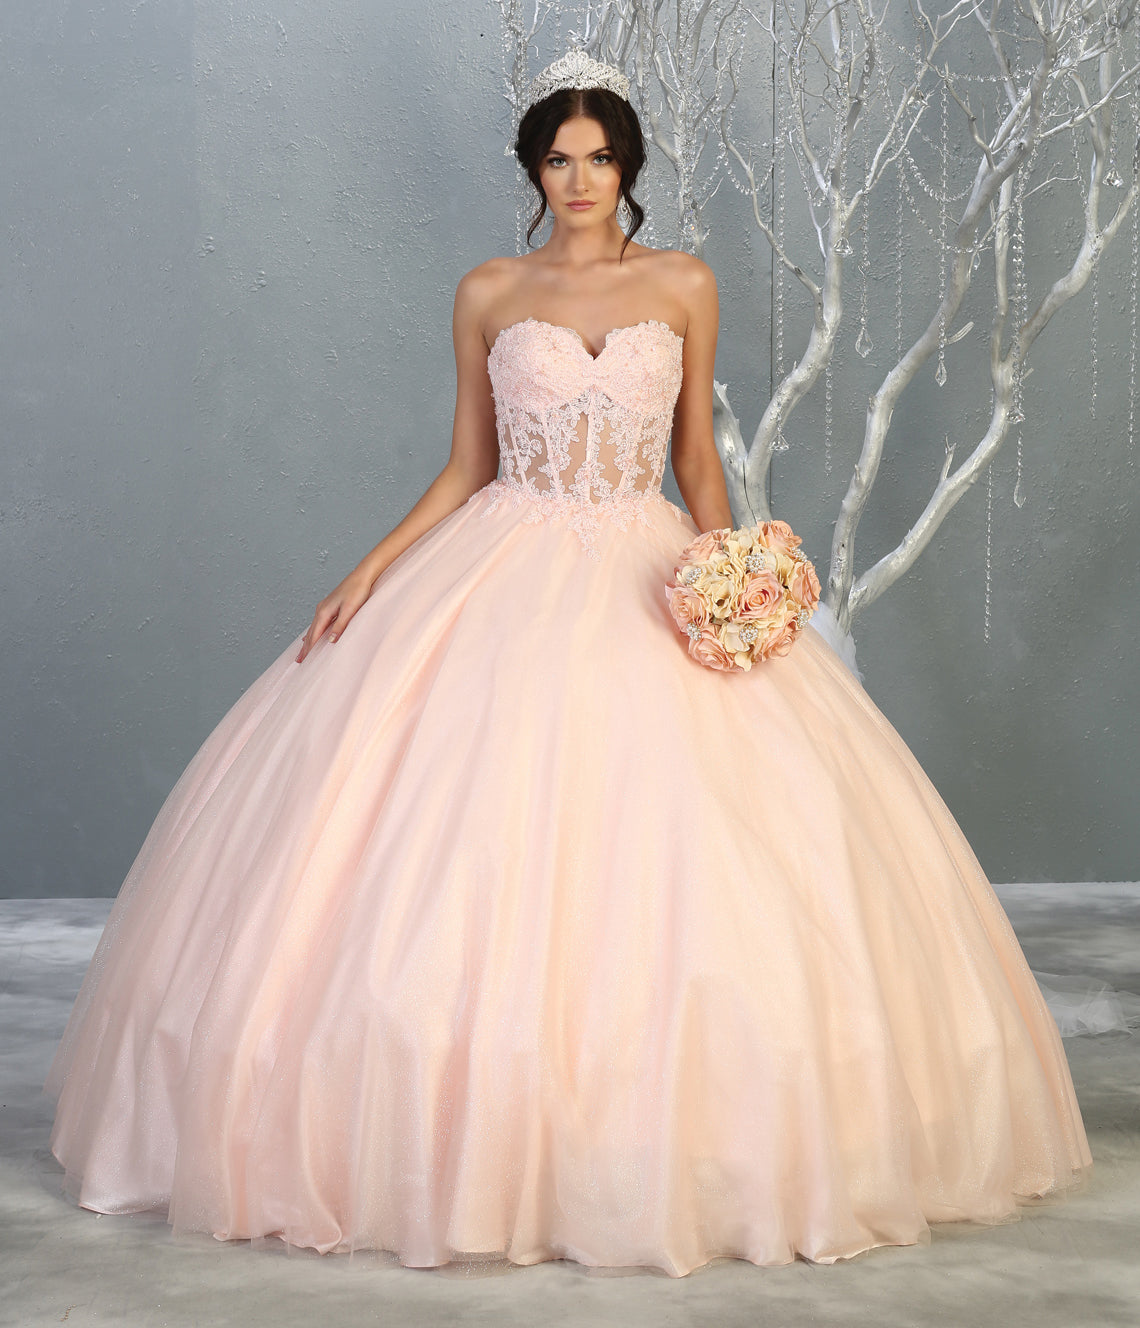 Strapless Quinceanera Ball Gown - LA141